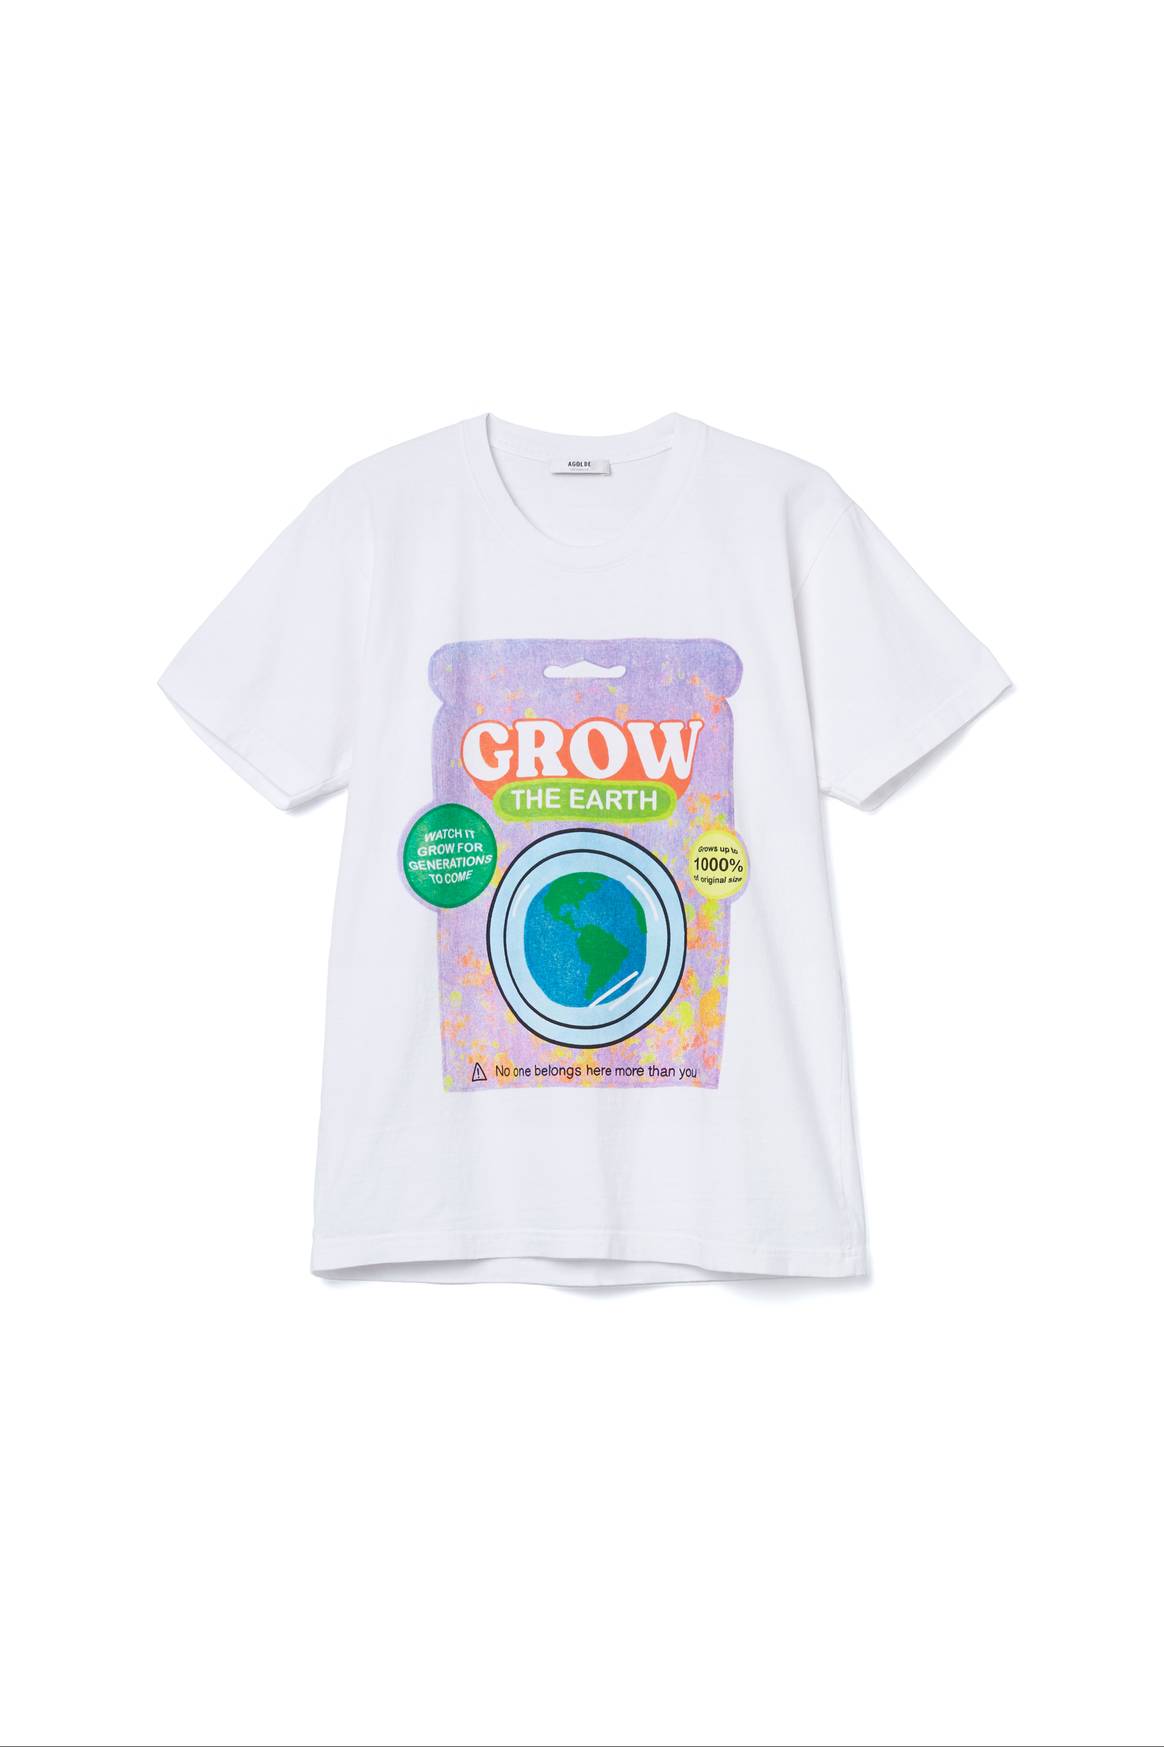 Agolde Grow T-shirt, courtesy of the brand